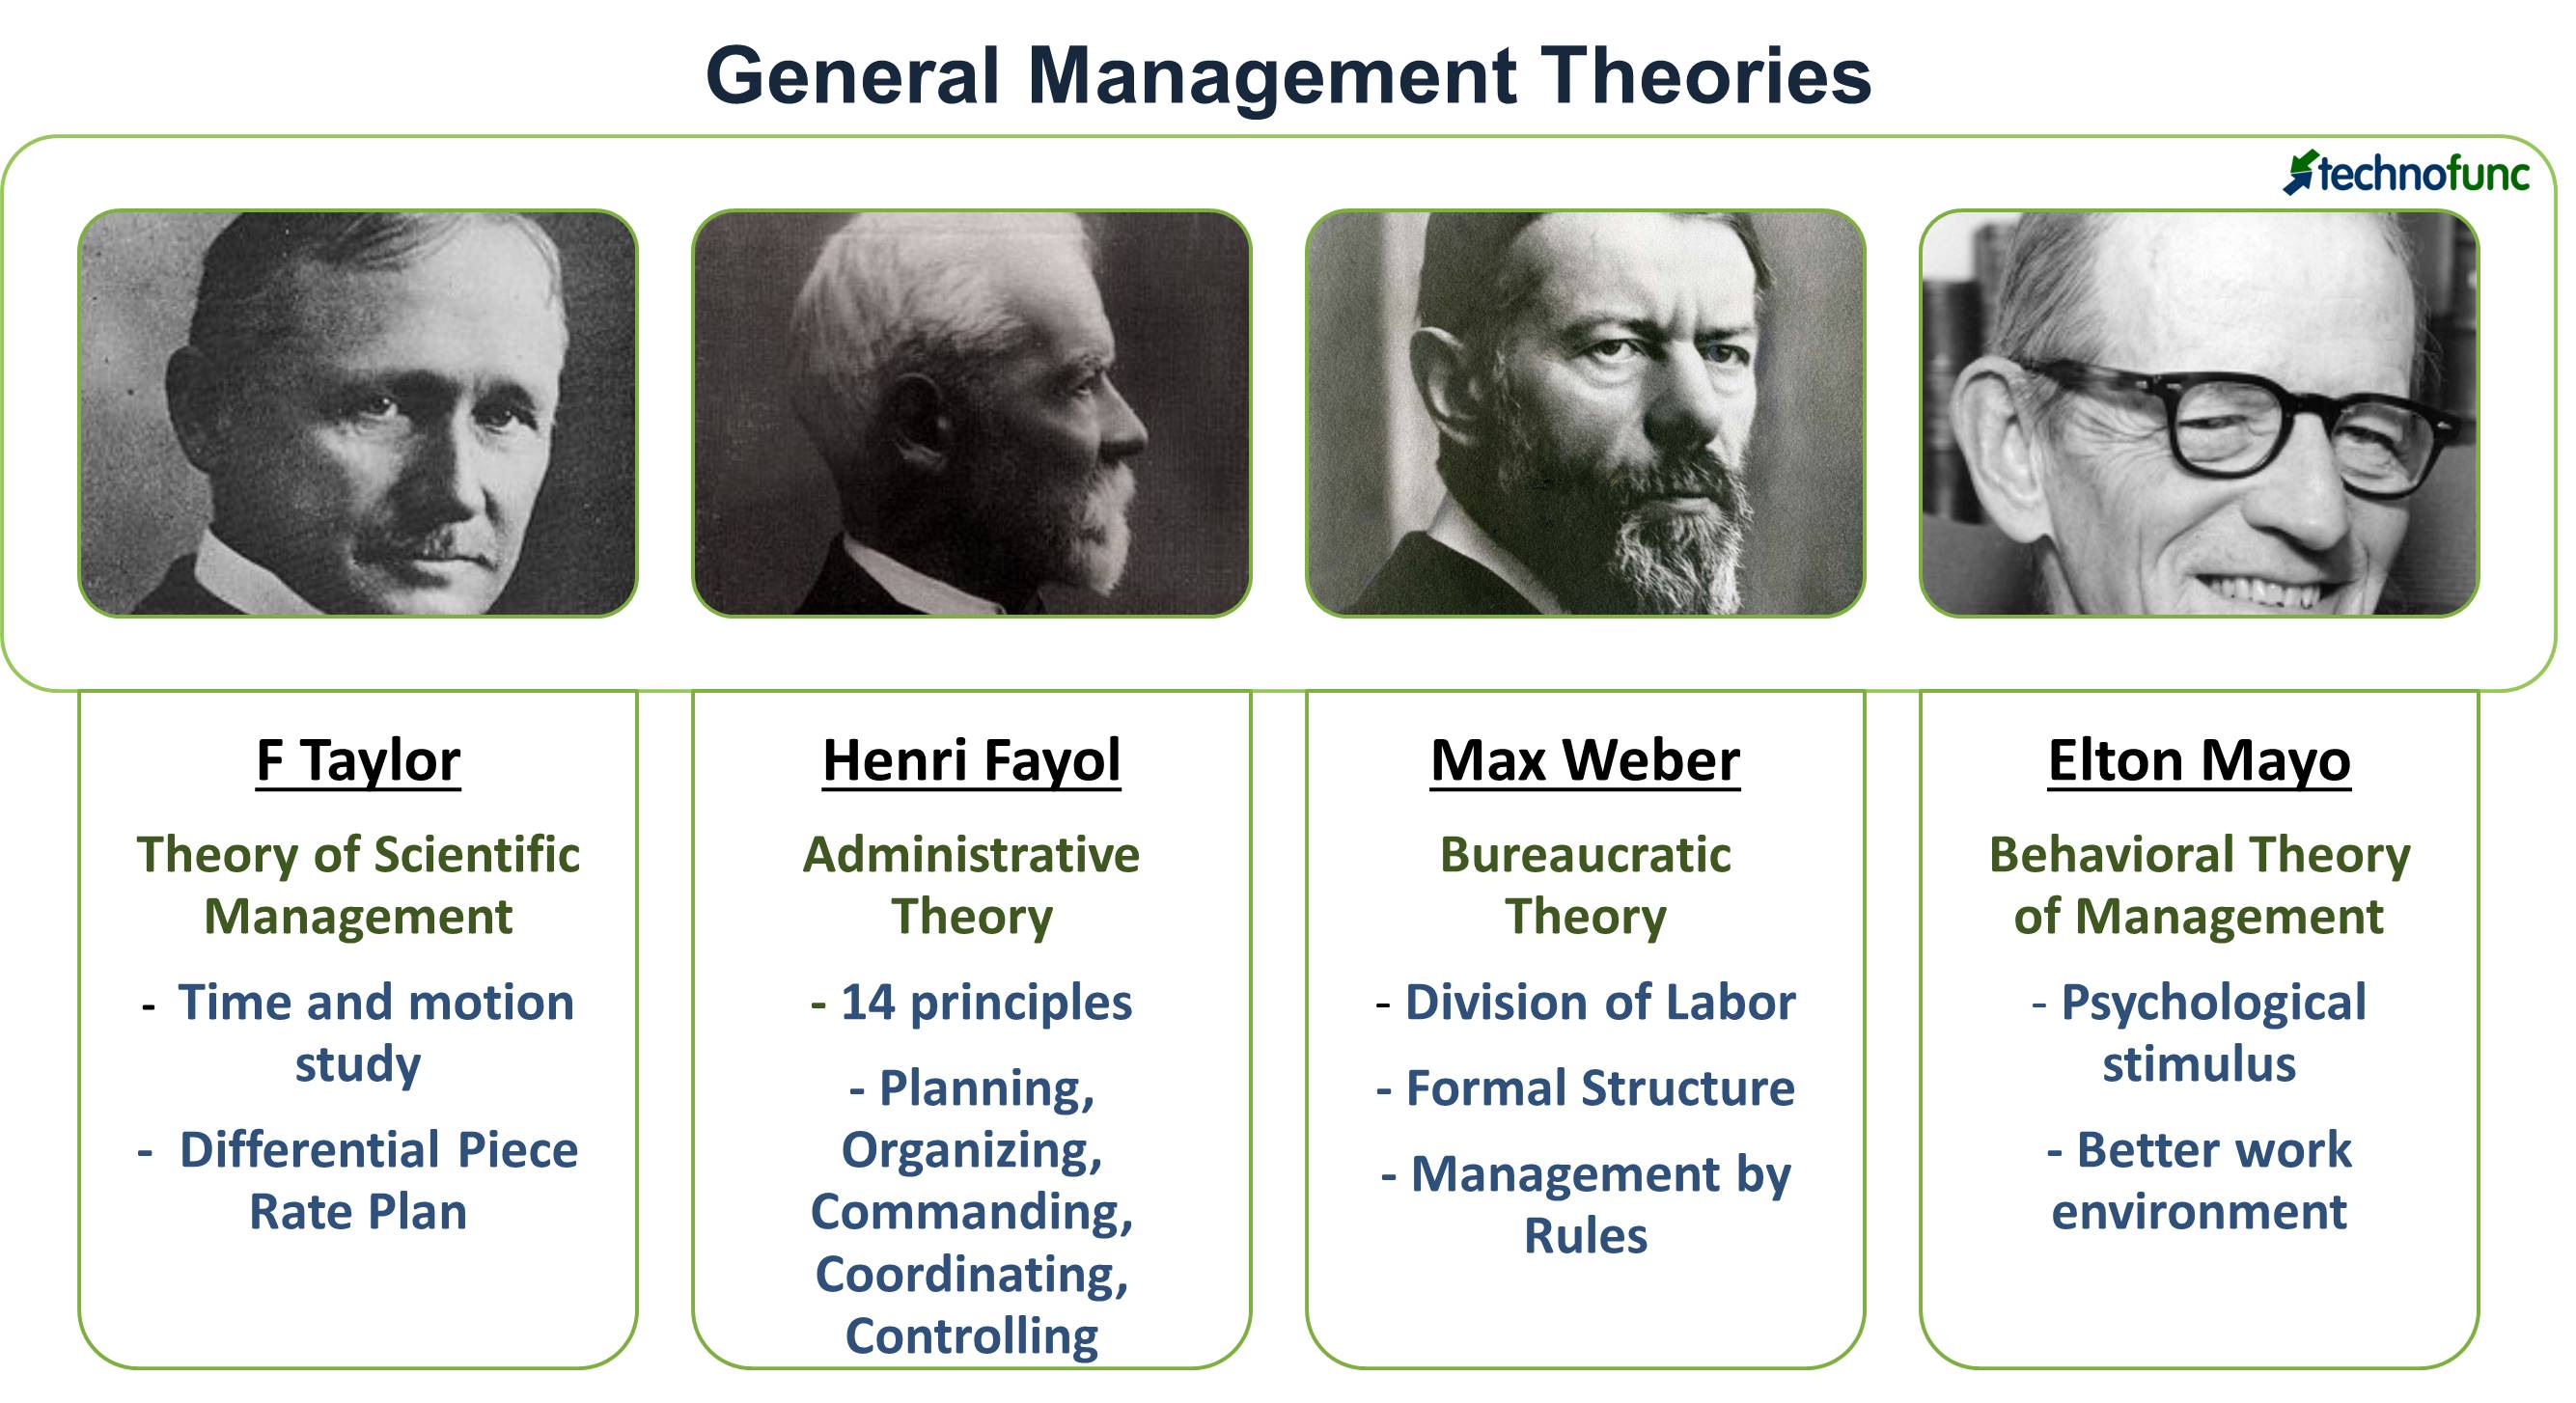 the development of management thought